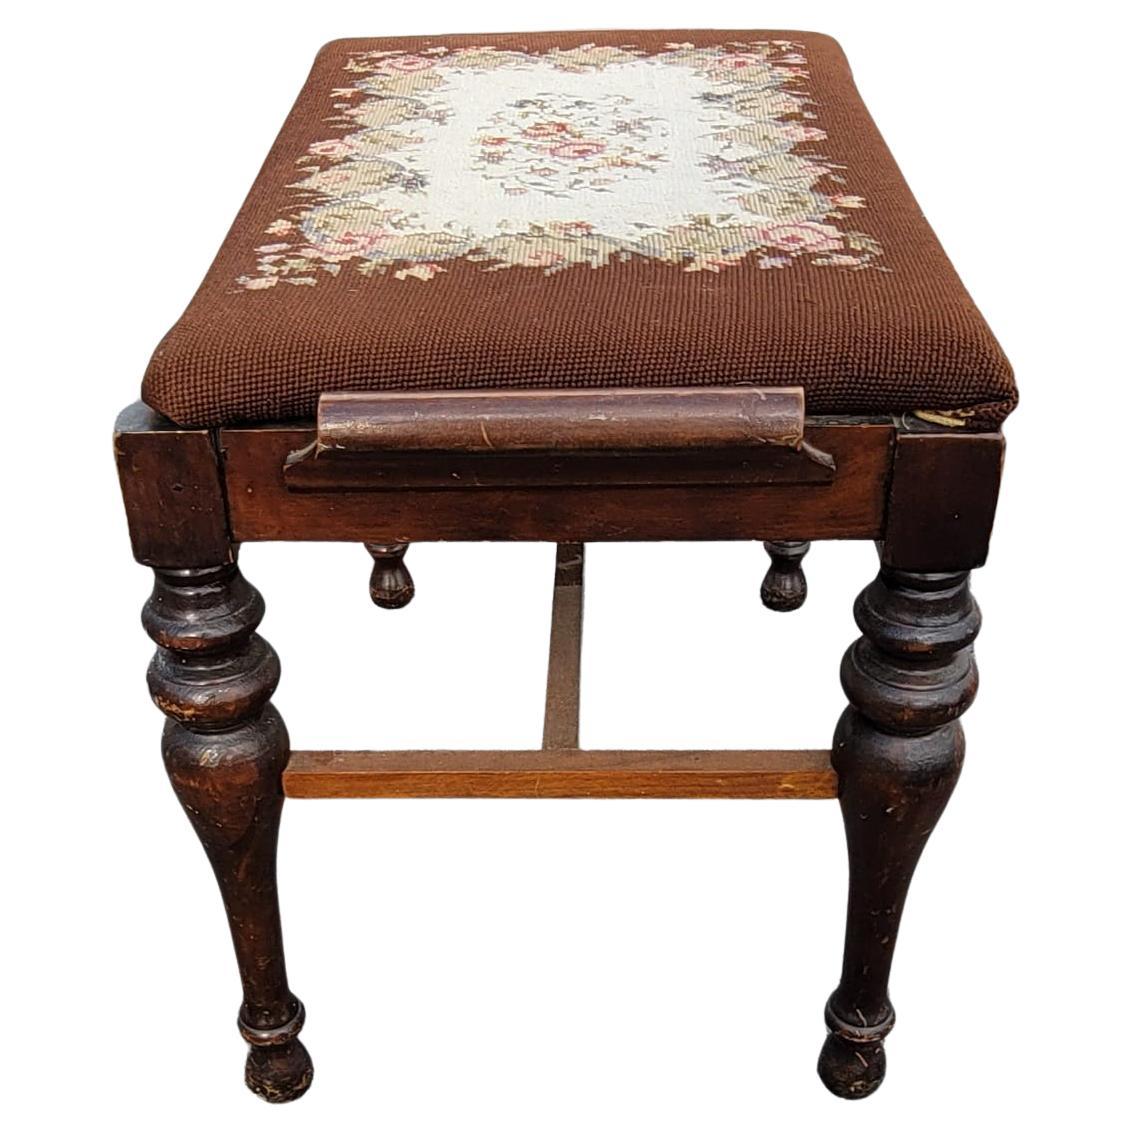 A charming and patinated George III style mahogany and needlepoint upholstered bench.